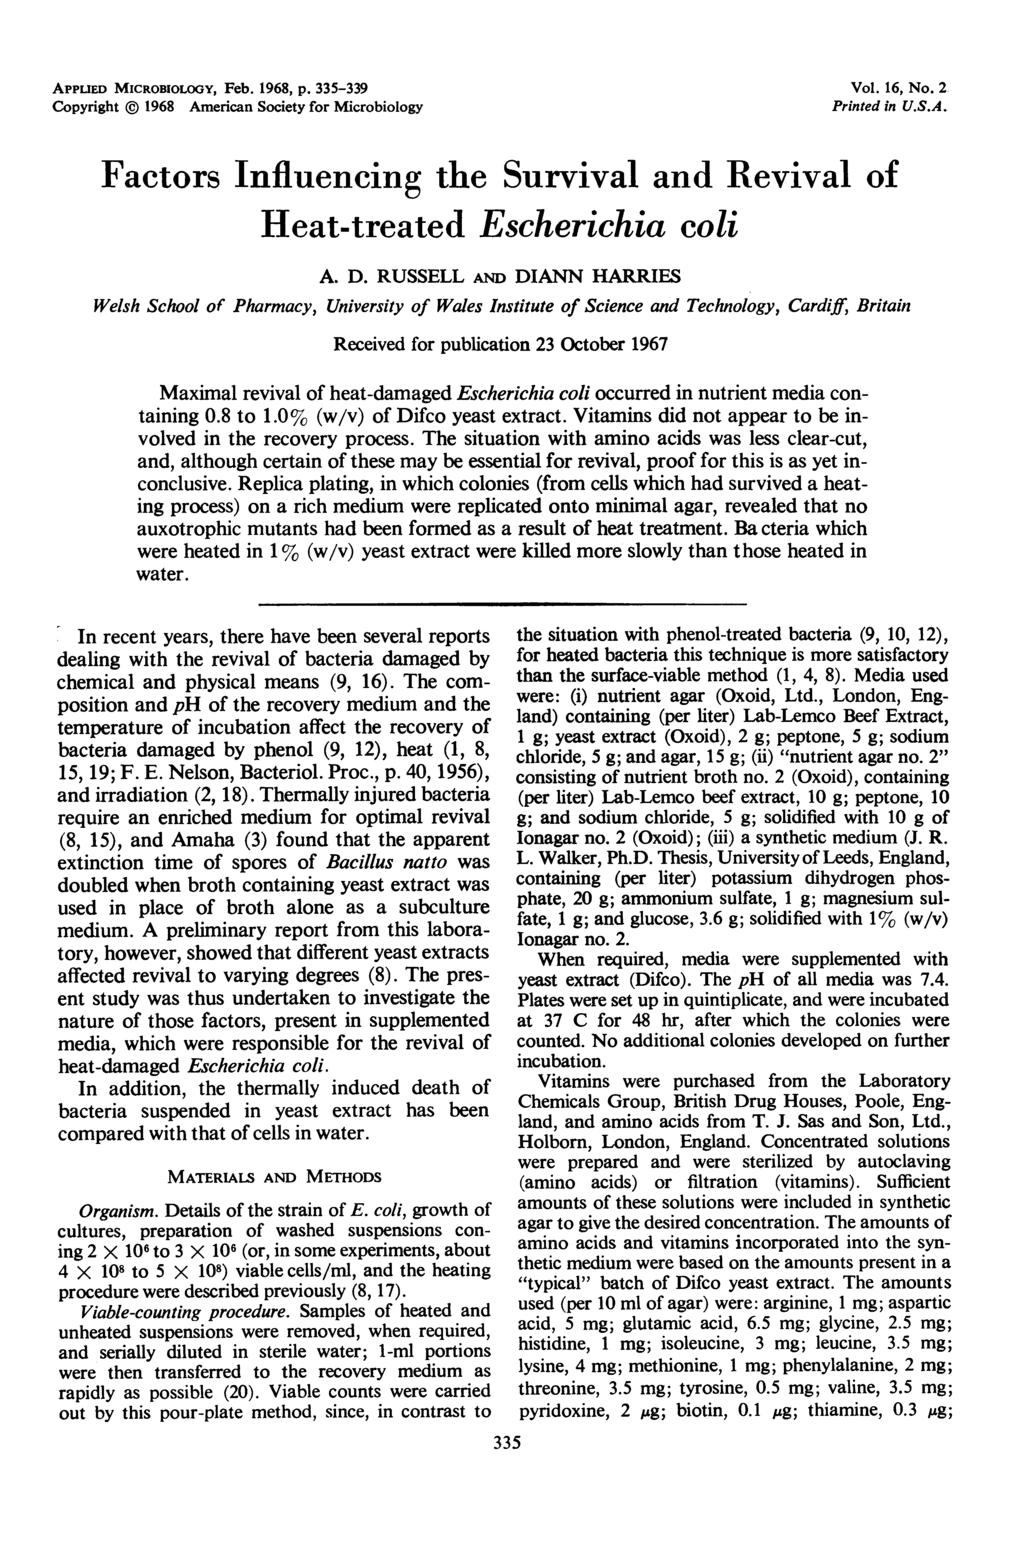 APPLIED MICROBIOLOGY, Feb. 1968, p. 335-339 Copyright @ 1968 American Society for Microbiology Vol. 16, No. 2 Printed in U.S.A. Factors Influencing the Survival and Revival of Heat-treated Escherichia coli A.